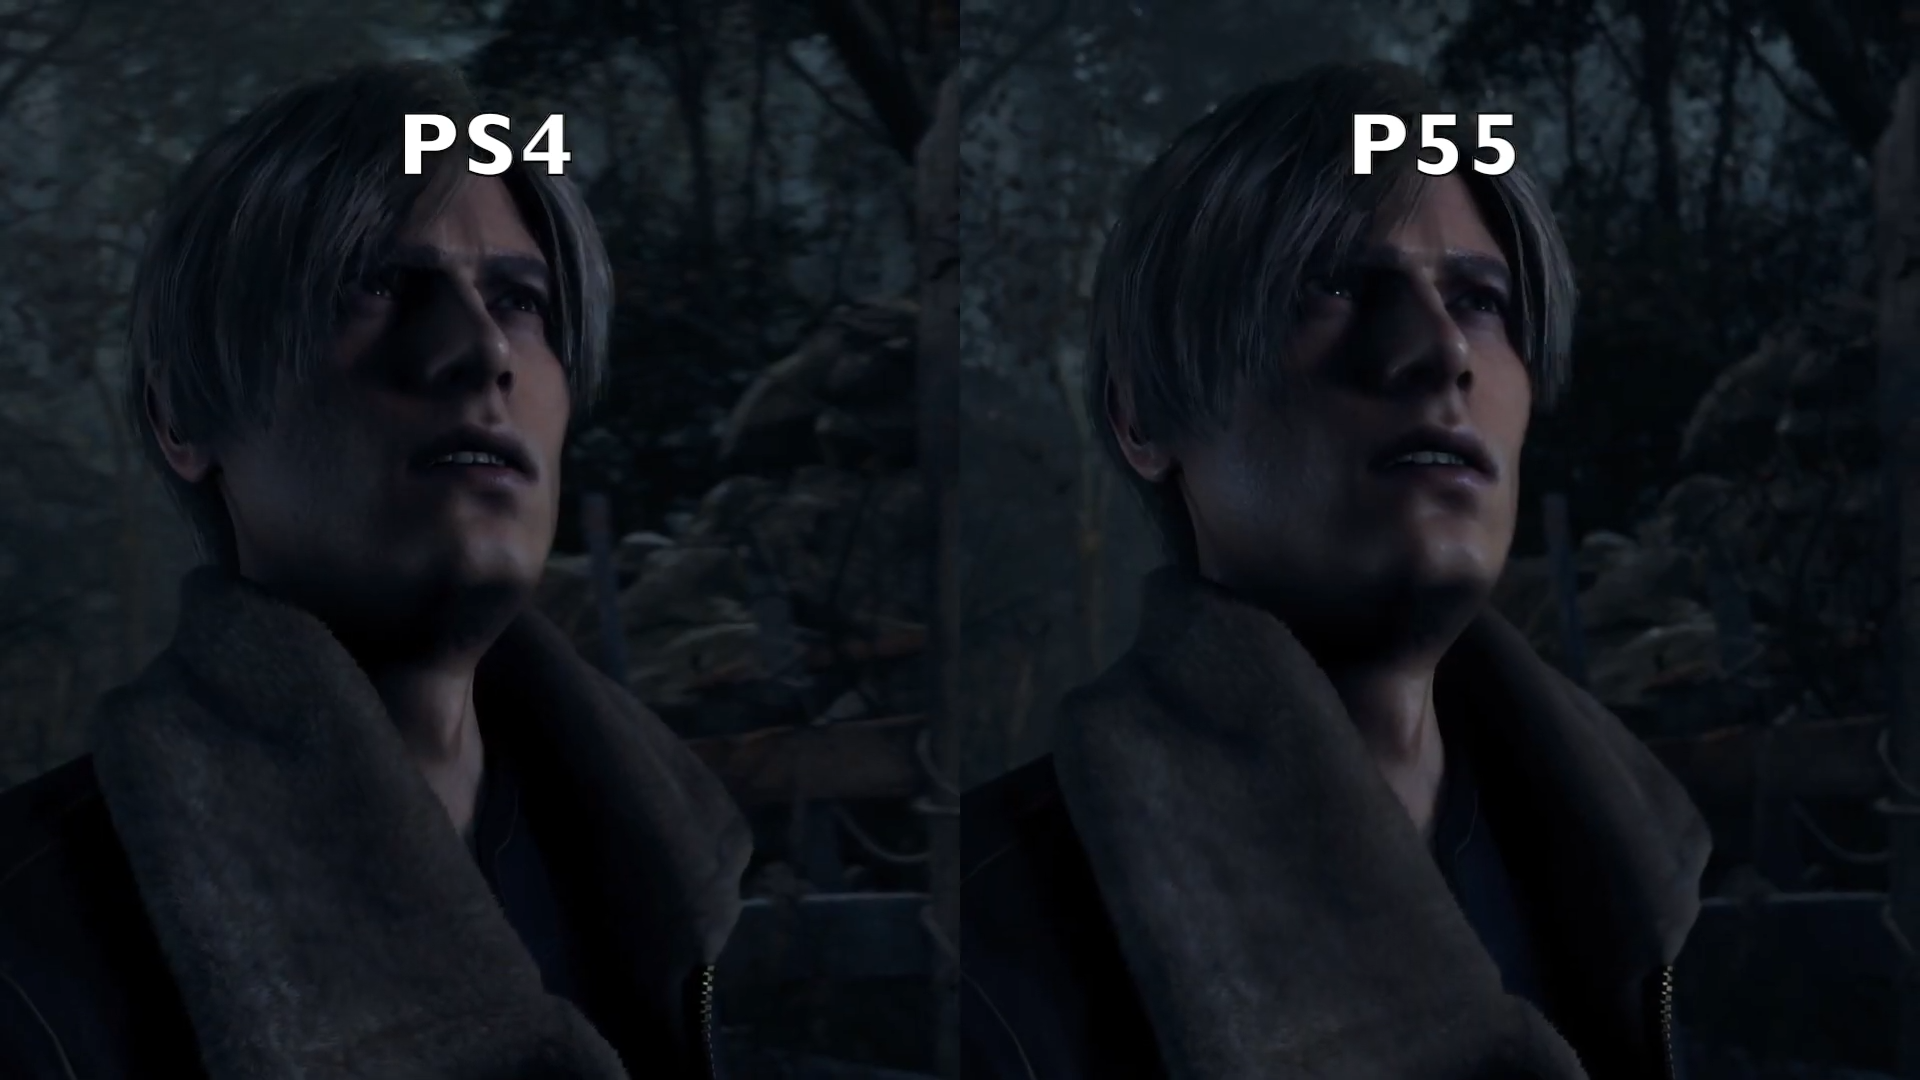 RESIDENT EVIL 4 DUALSENSE DIFFERENCE!! #videogameconsole #gaming